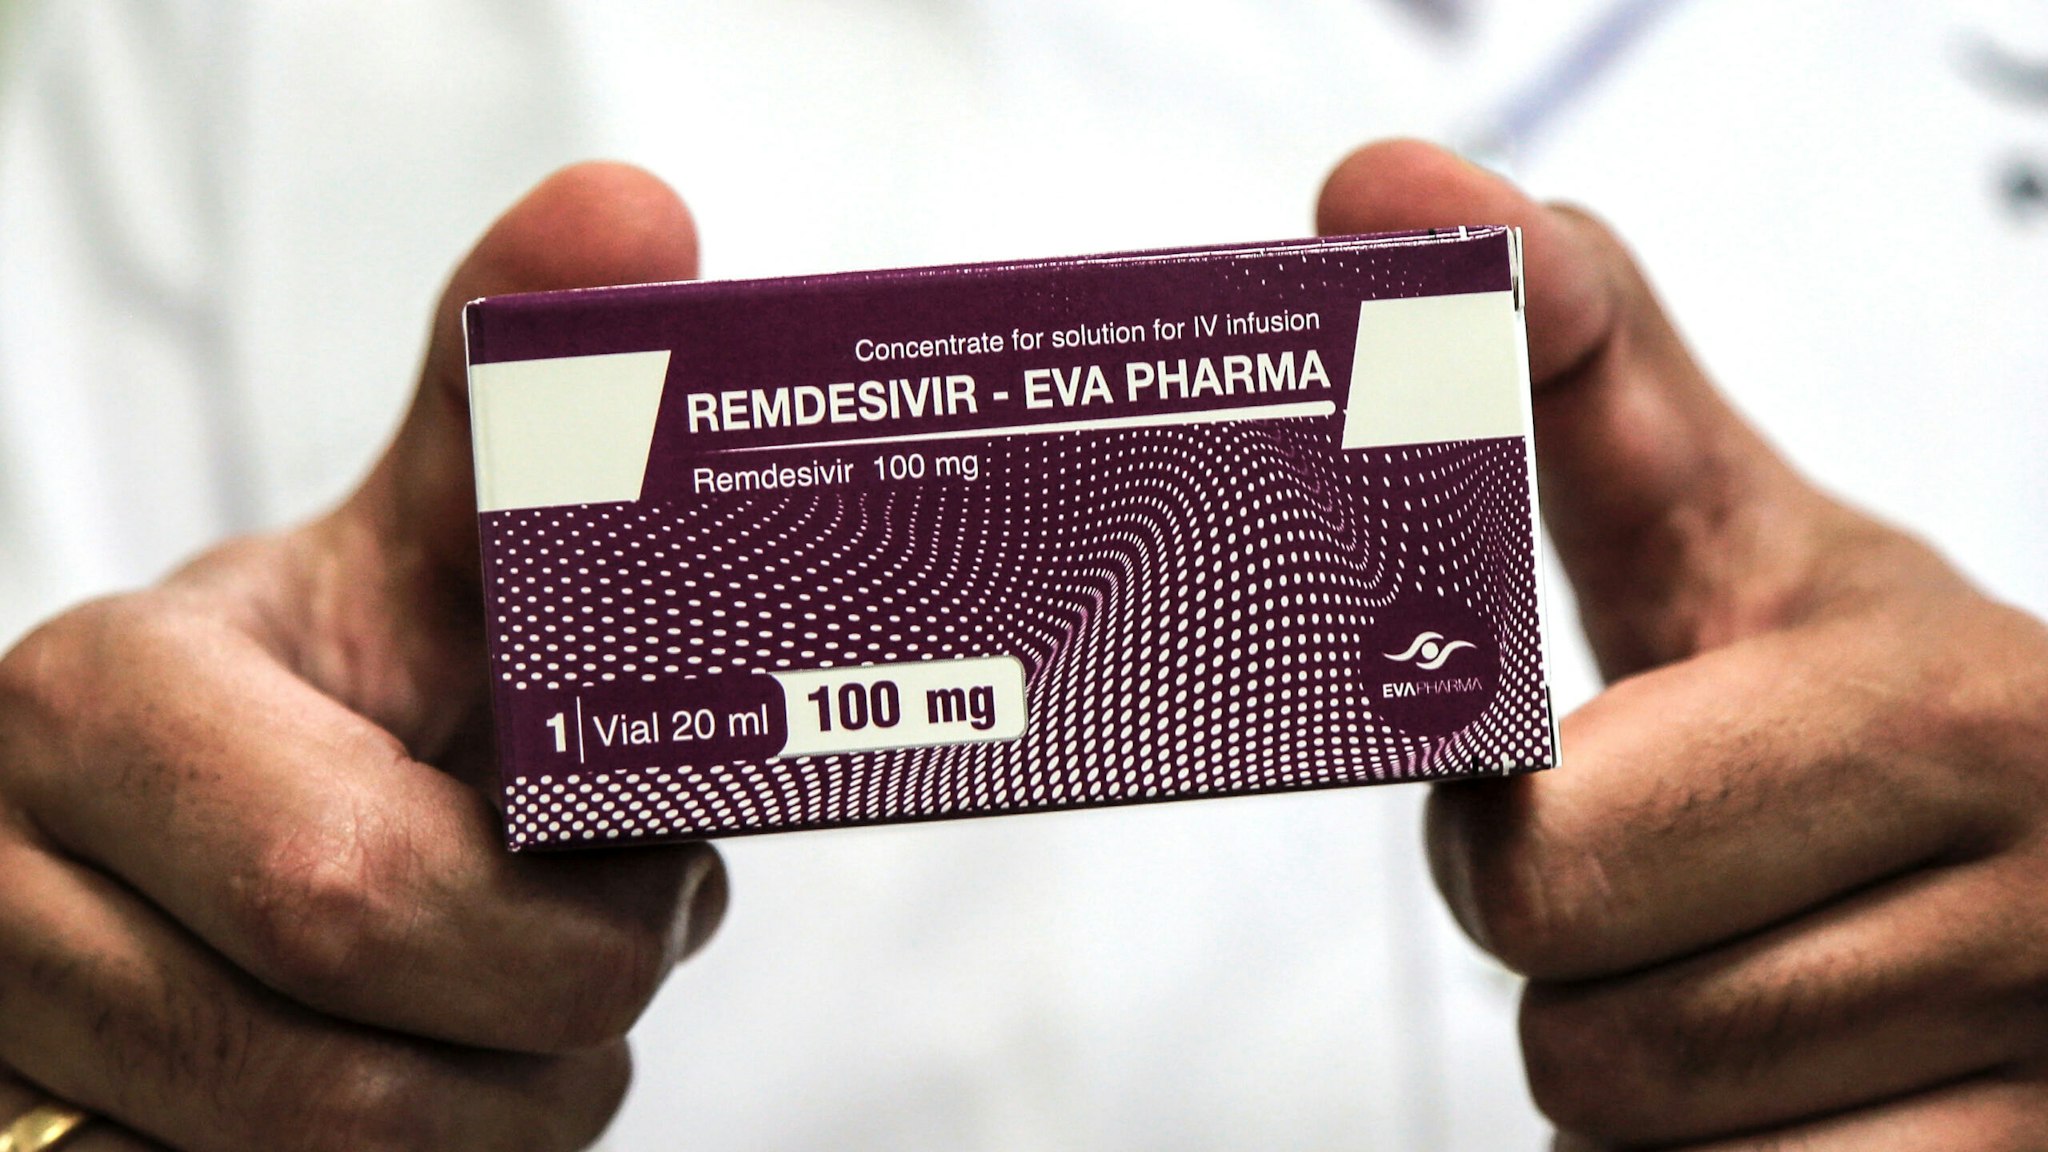 29 June 2020, Egypt, Giza: An employee of Egyptian pharmaceutical company Eva Pharma holds a pack containing vials of Remdesivir, a broad-spectrum antiviral medication approved as a specific treatment for COVID-19, at the company's factory, which started producing the drug this week with a production capacity of up to 1.5 million doses per month.